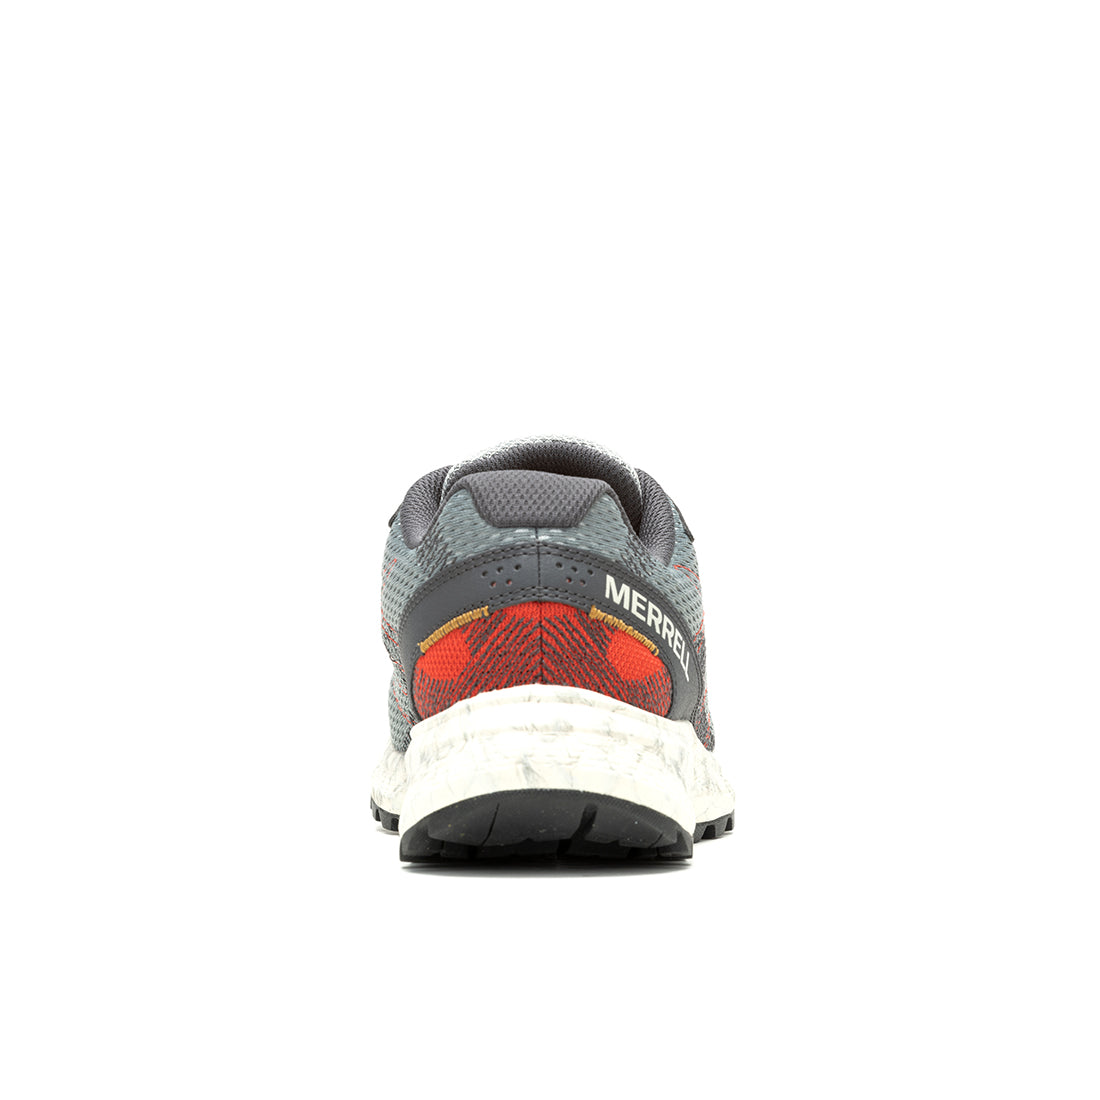 Fly Strike - Monument Mens Trail Running Shoes